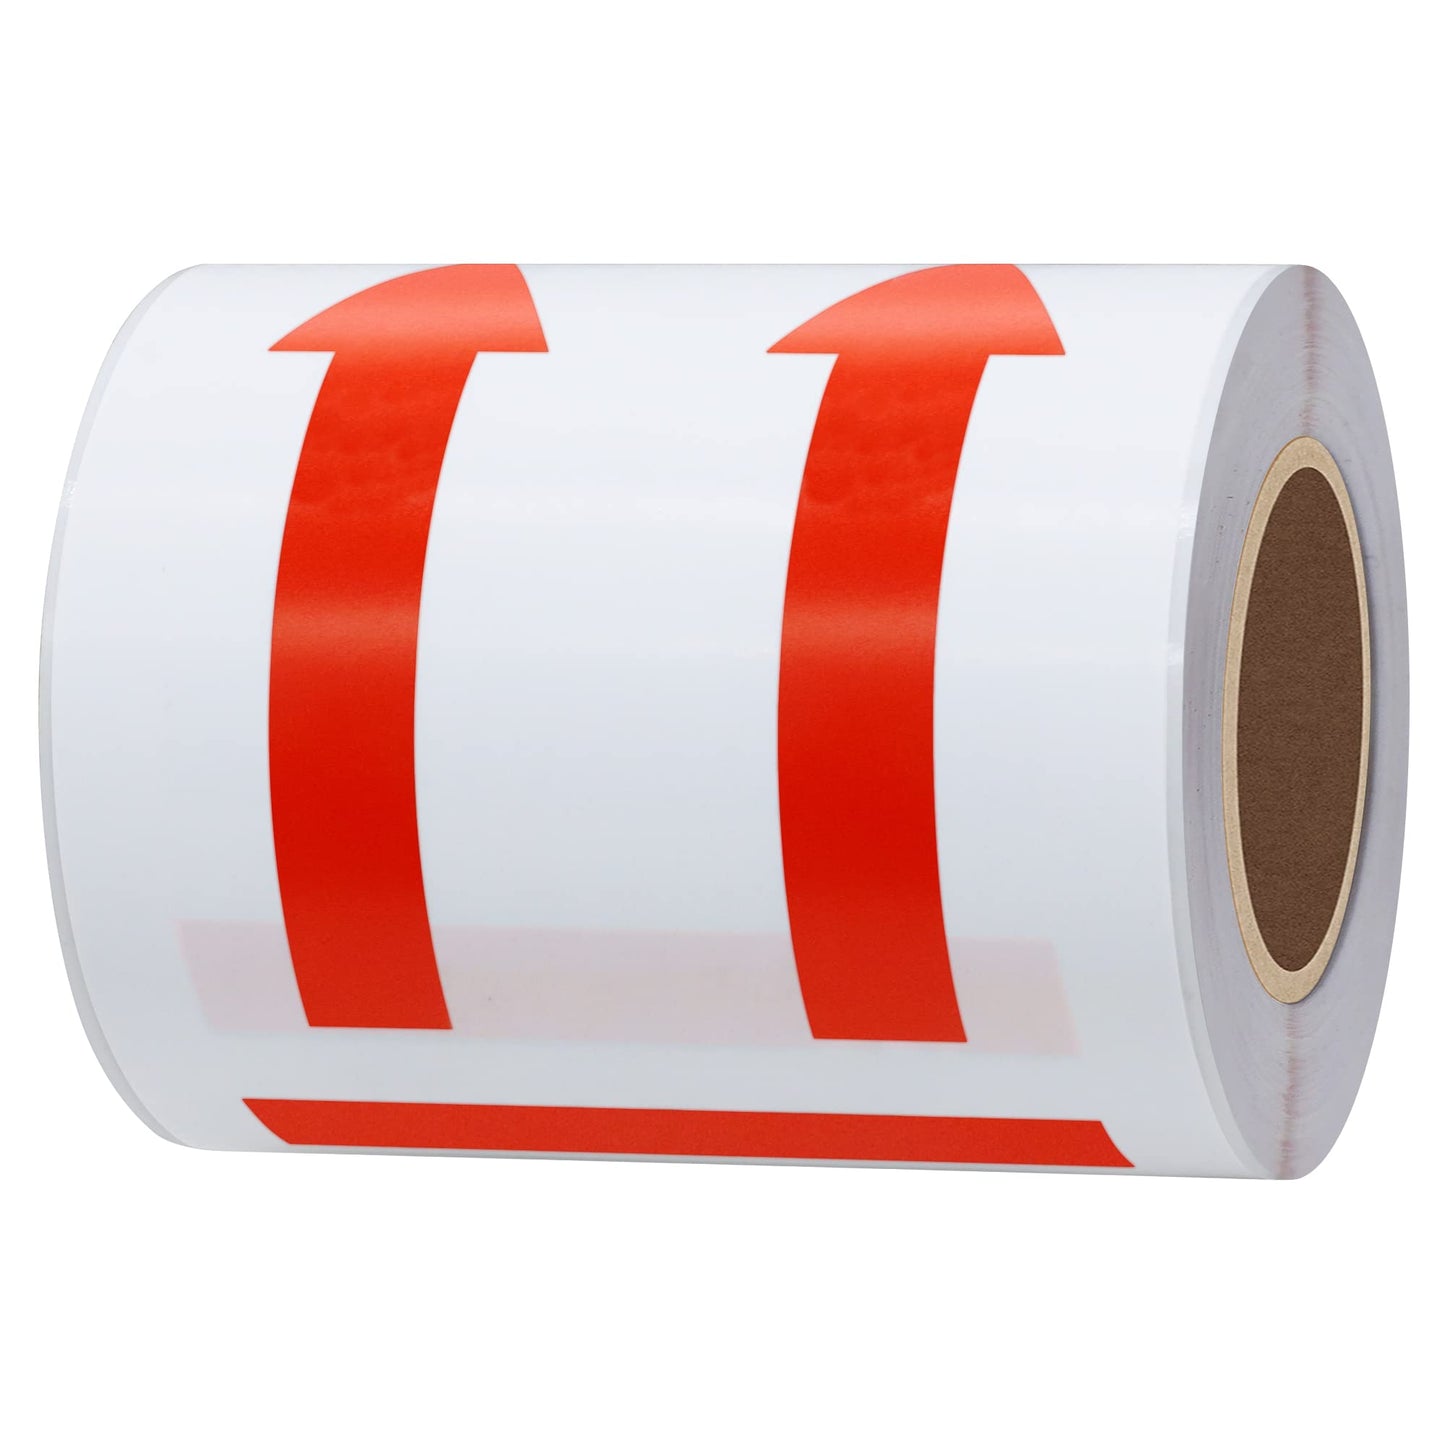 Hybsk 3x5 inch Red Arrows This Side Up Stickers Safe Handling for Shipping and Packing - 100 Adhesive Labels Per Roll